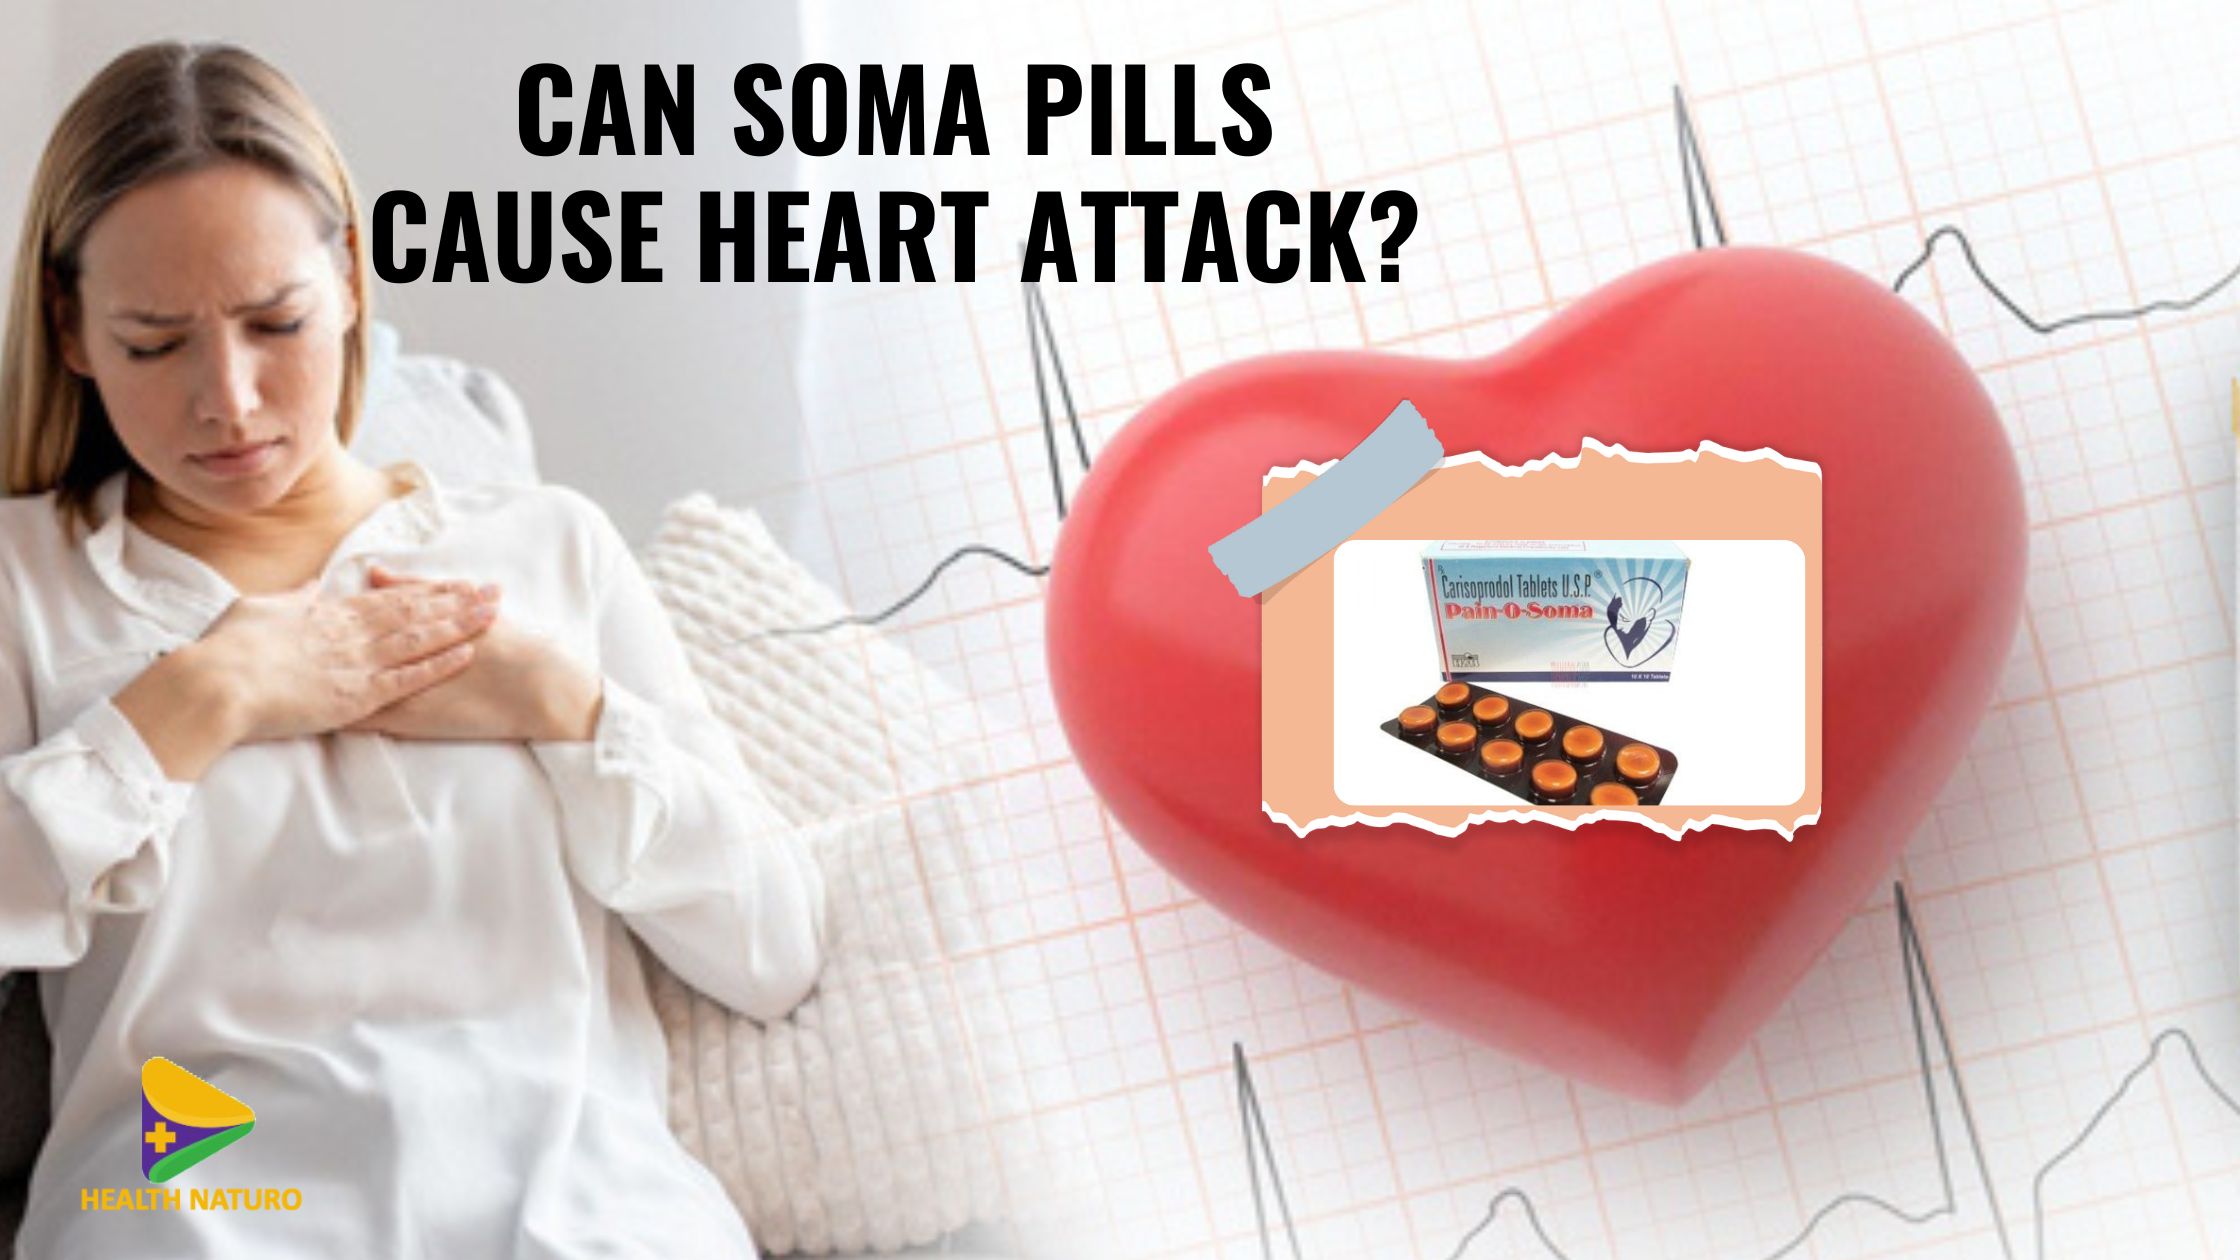 Can soma pills cause a heart attack?